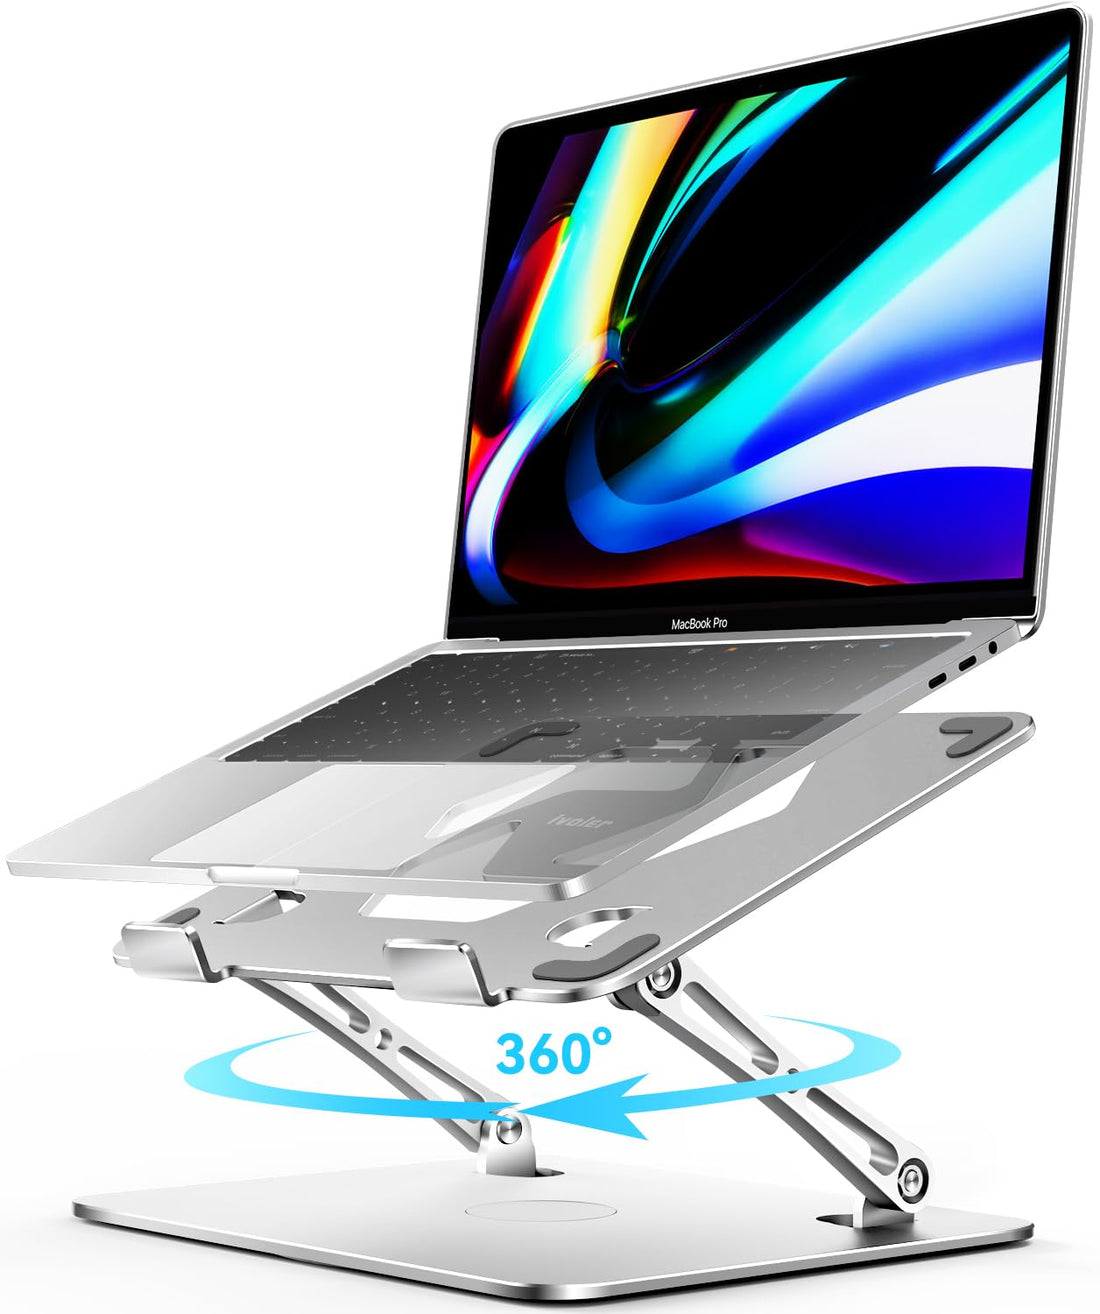 ivoler Laptop Stand for Desk, Adjustable Computer Stand with 360° Rotating Base, Foldable & Portable Laptop Riser, Stable Typing, Suitable for Collaborative Work, Fits Laptops up to 16 inches [Silver]